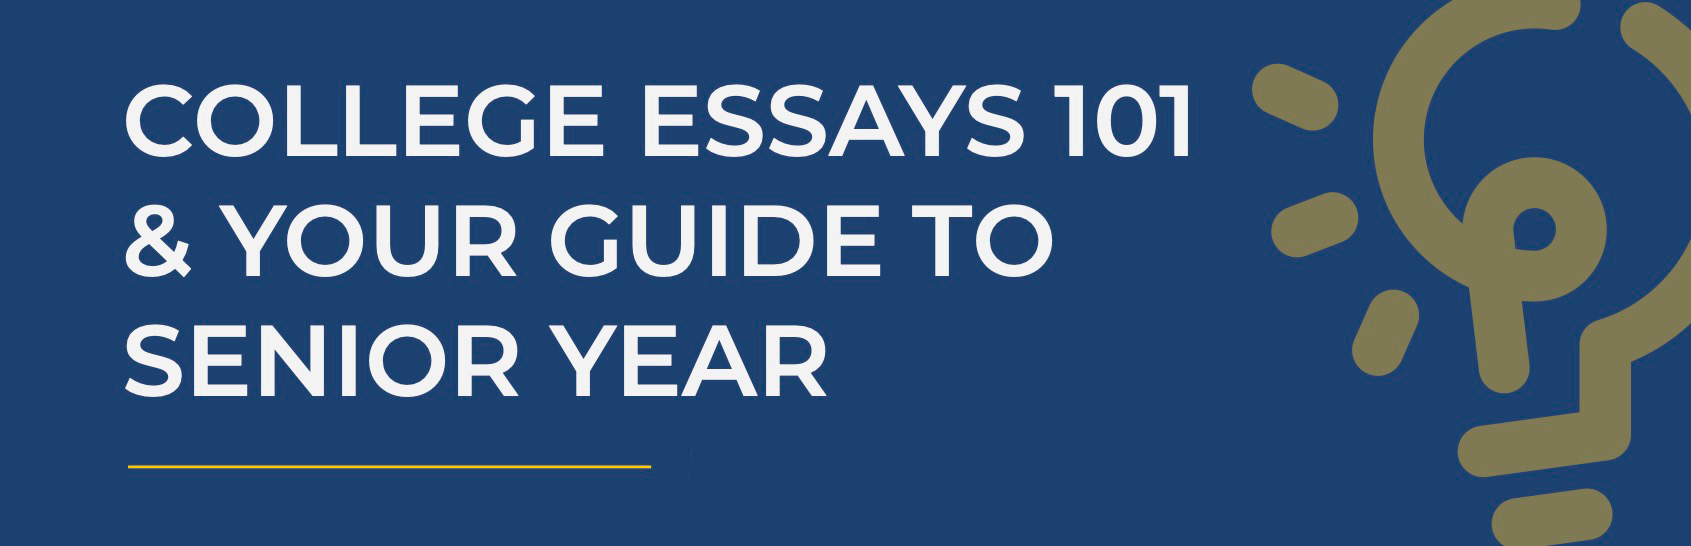 College Essays 101 & Your Guide To Senior Year